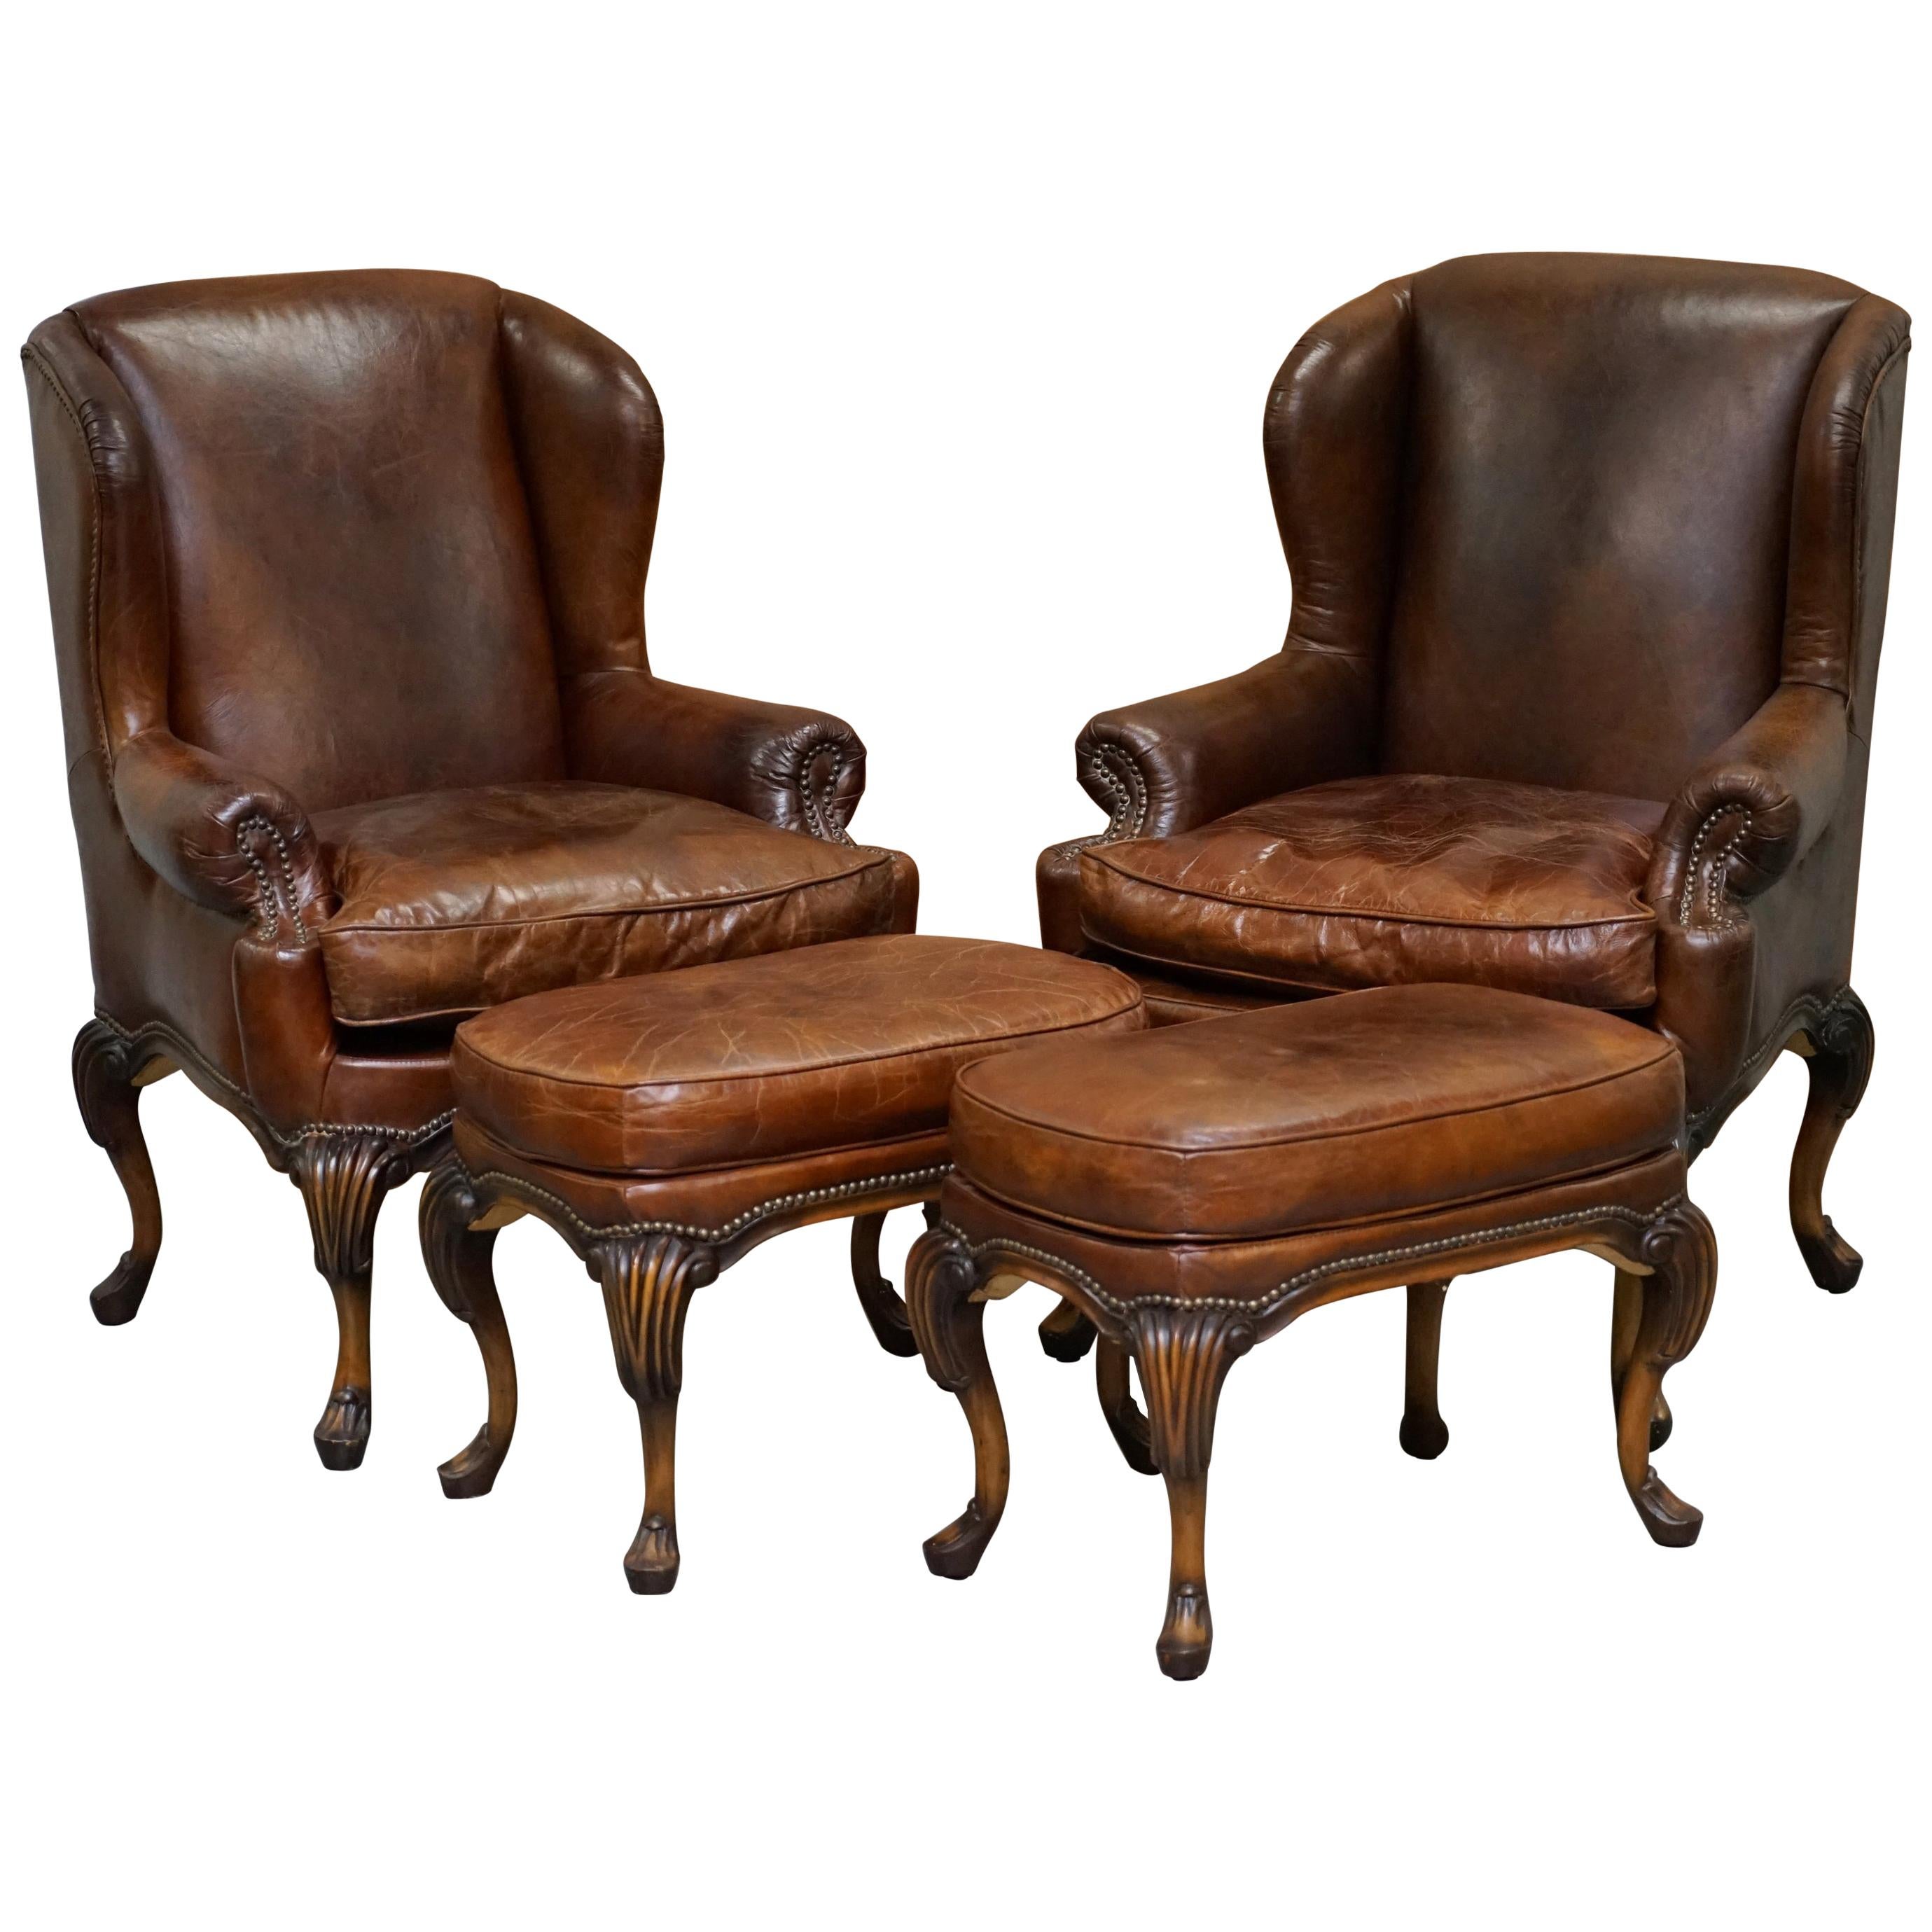 Stunning Pair of Heritage Brown Leather Wingback Armchairs & Matching Footstools